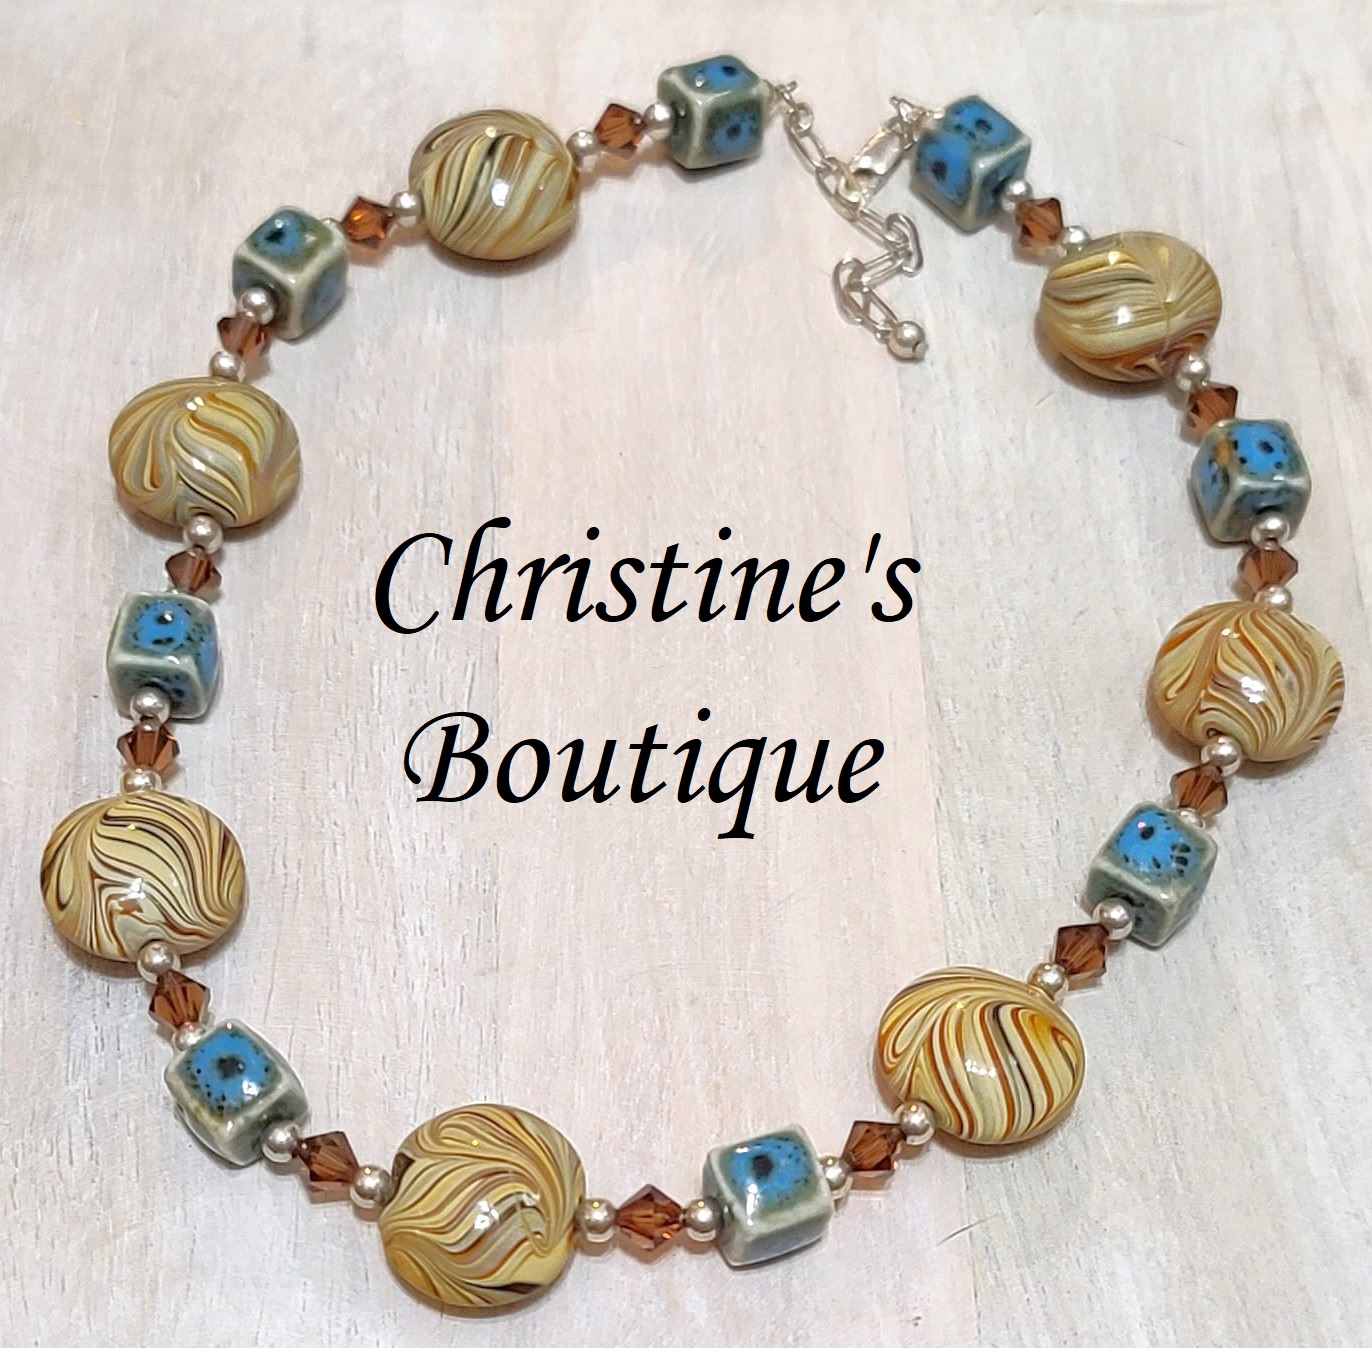 Swirl glass beads, ceramic and austrian crystals, handrafted, sterling silver chain and clasp